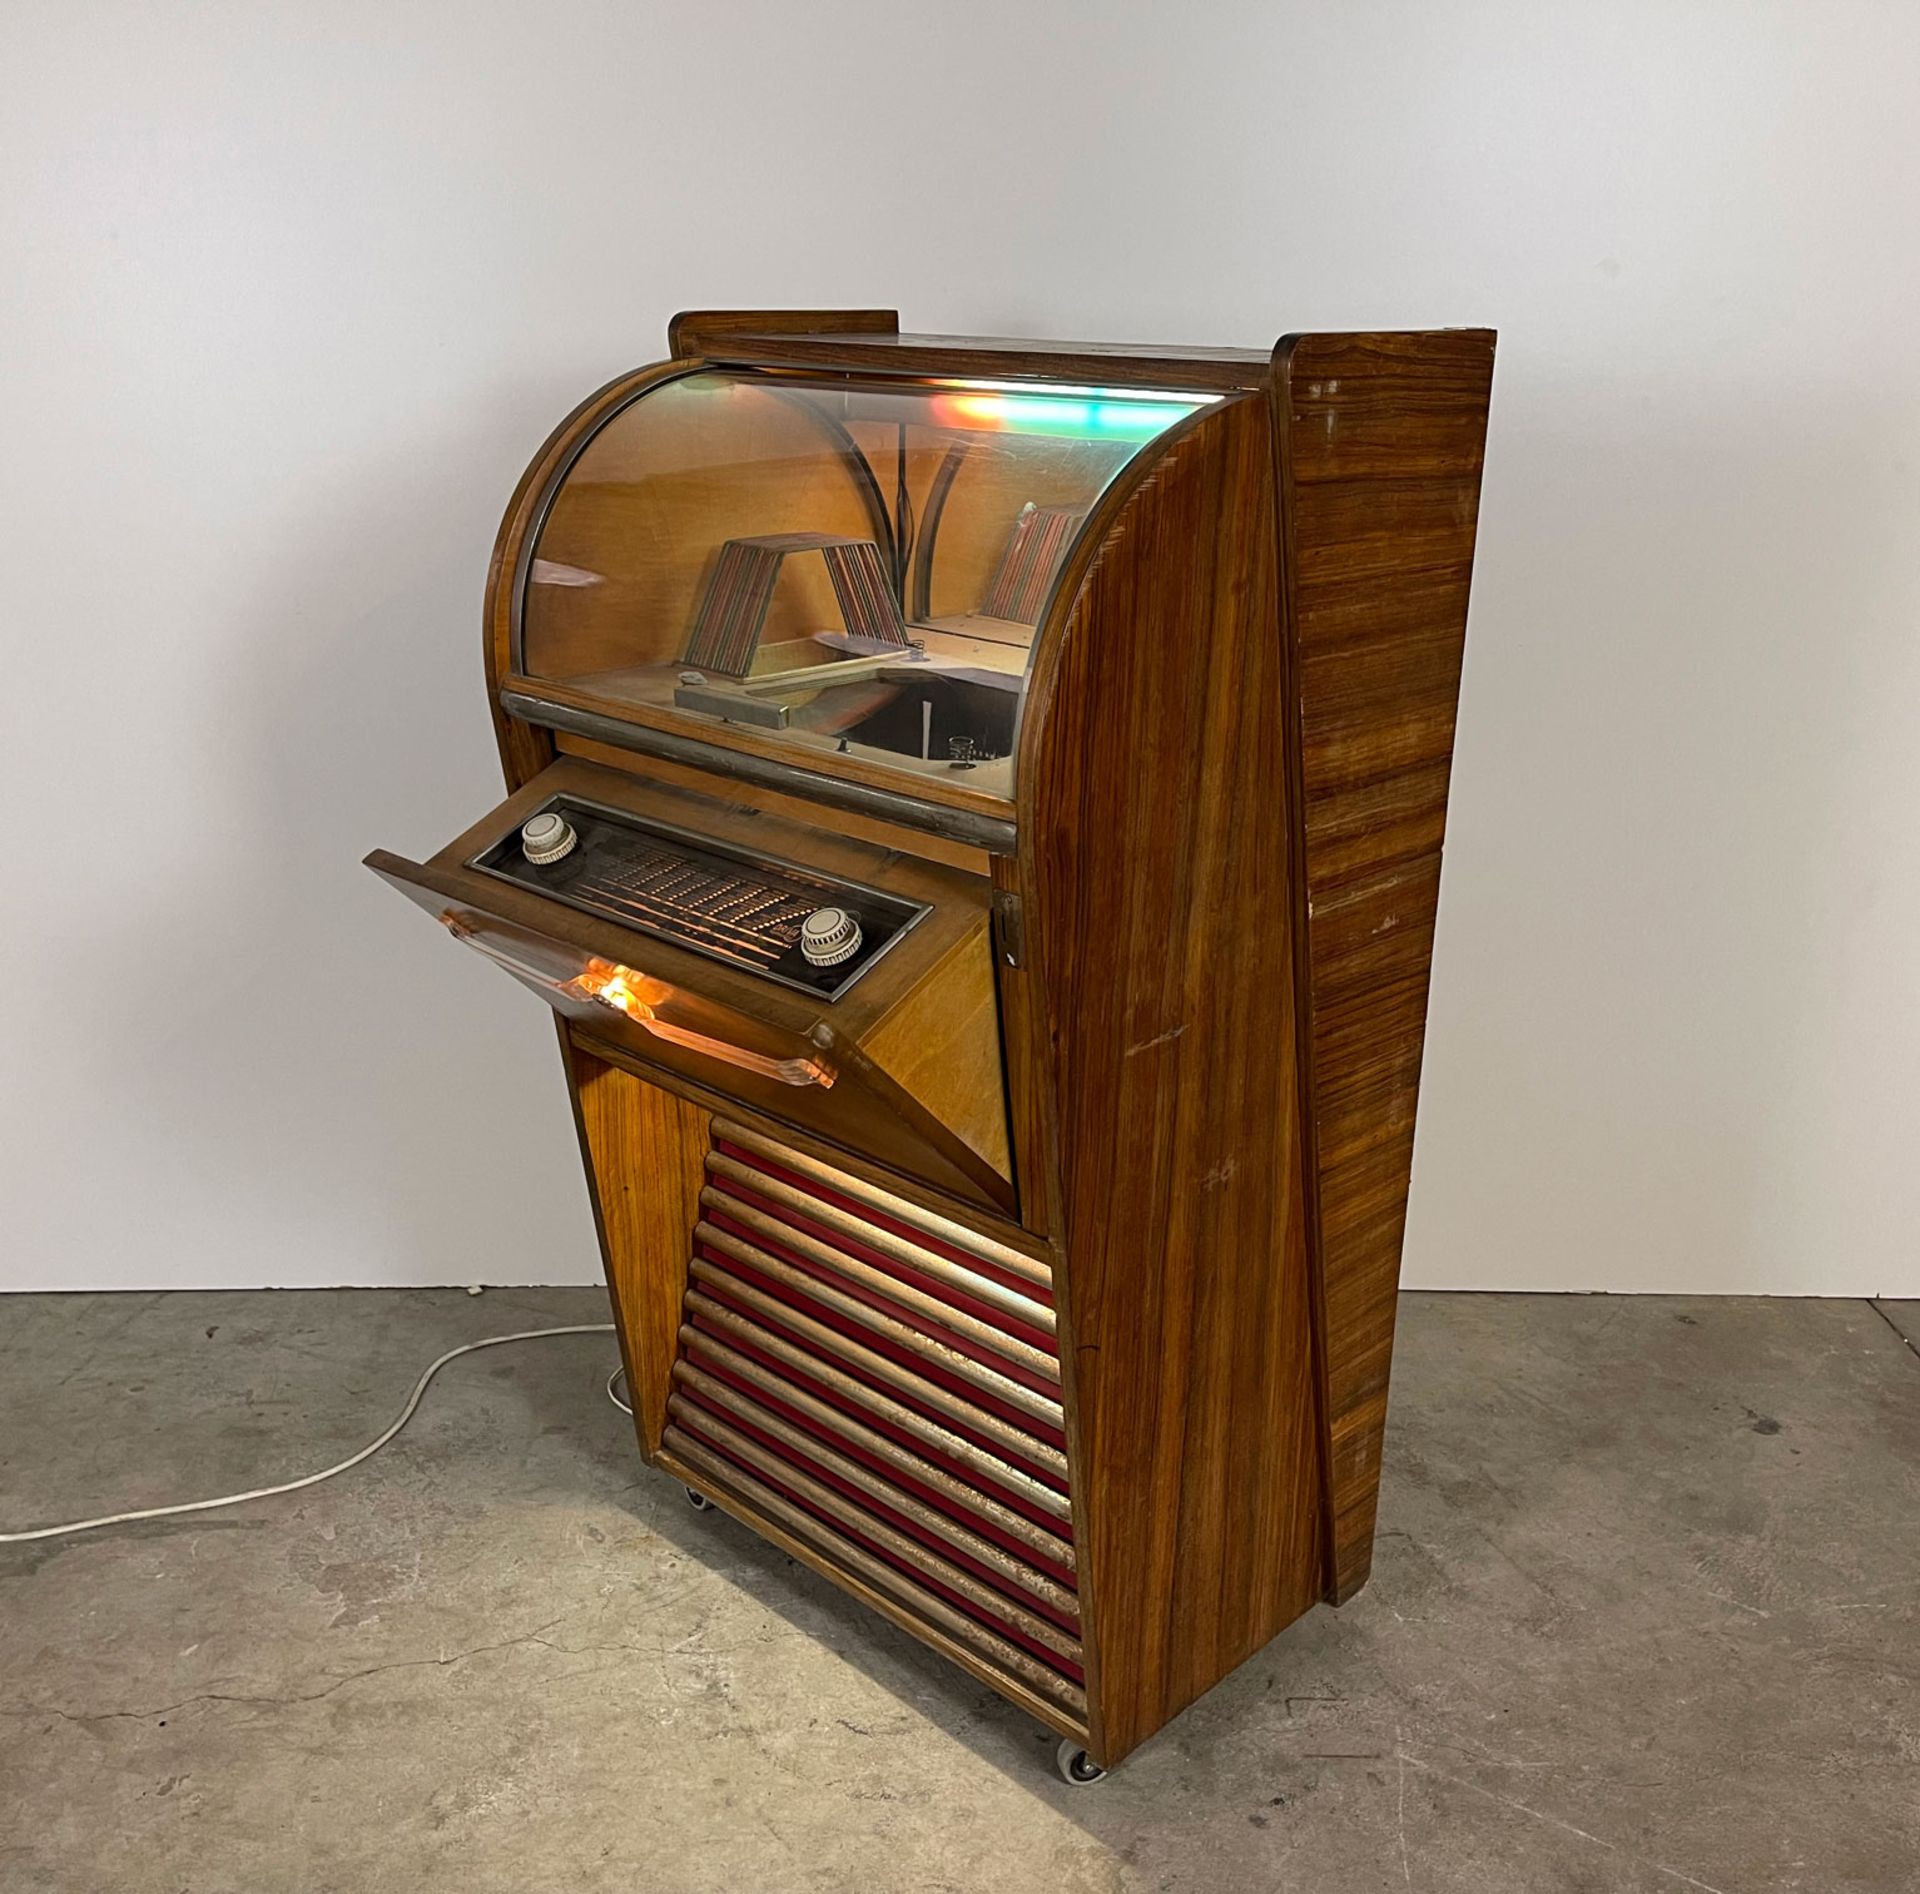 1958 Belgian Driva "Brabant Box" Coin-Op Radio and Record Player Jukebox - Image 2 of 14